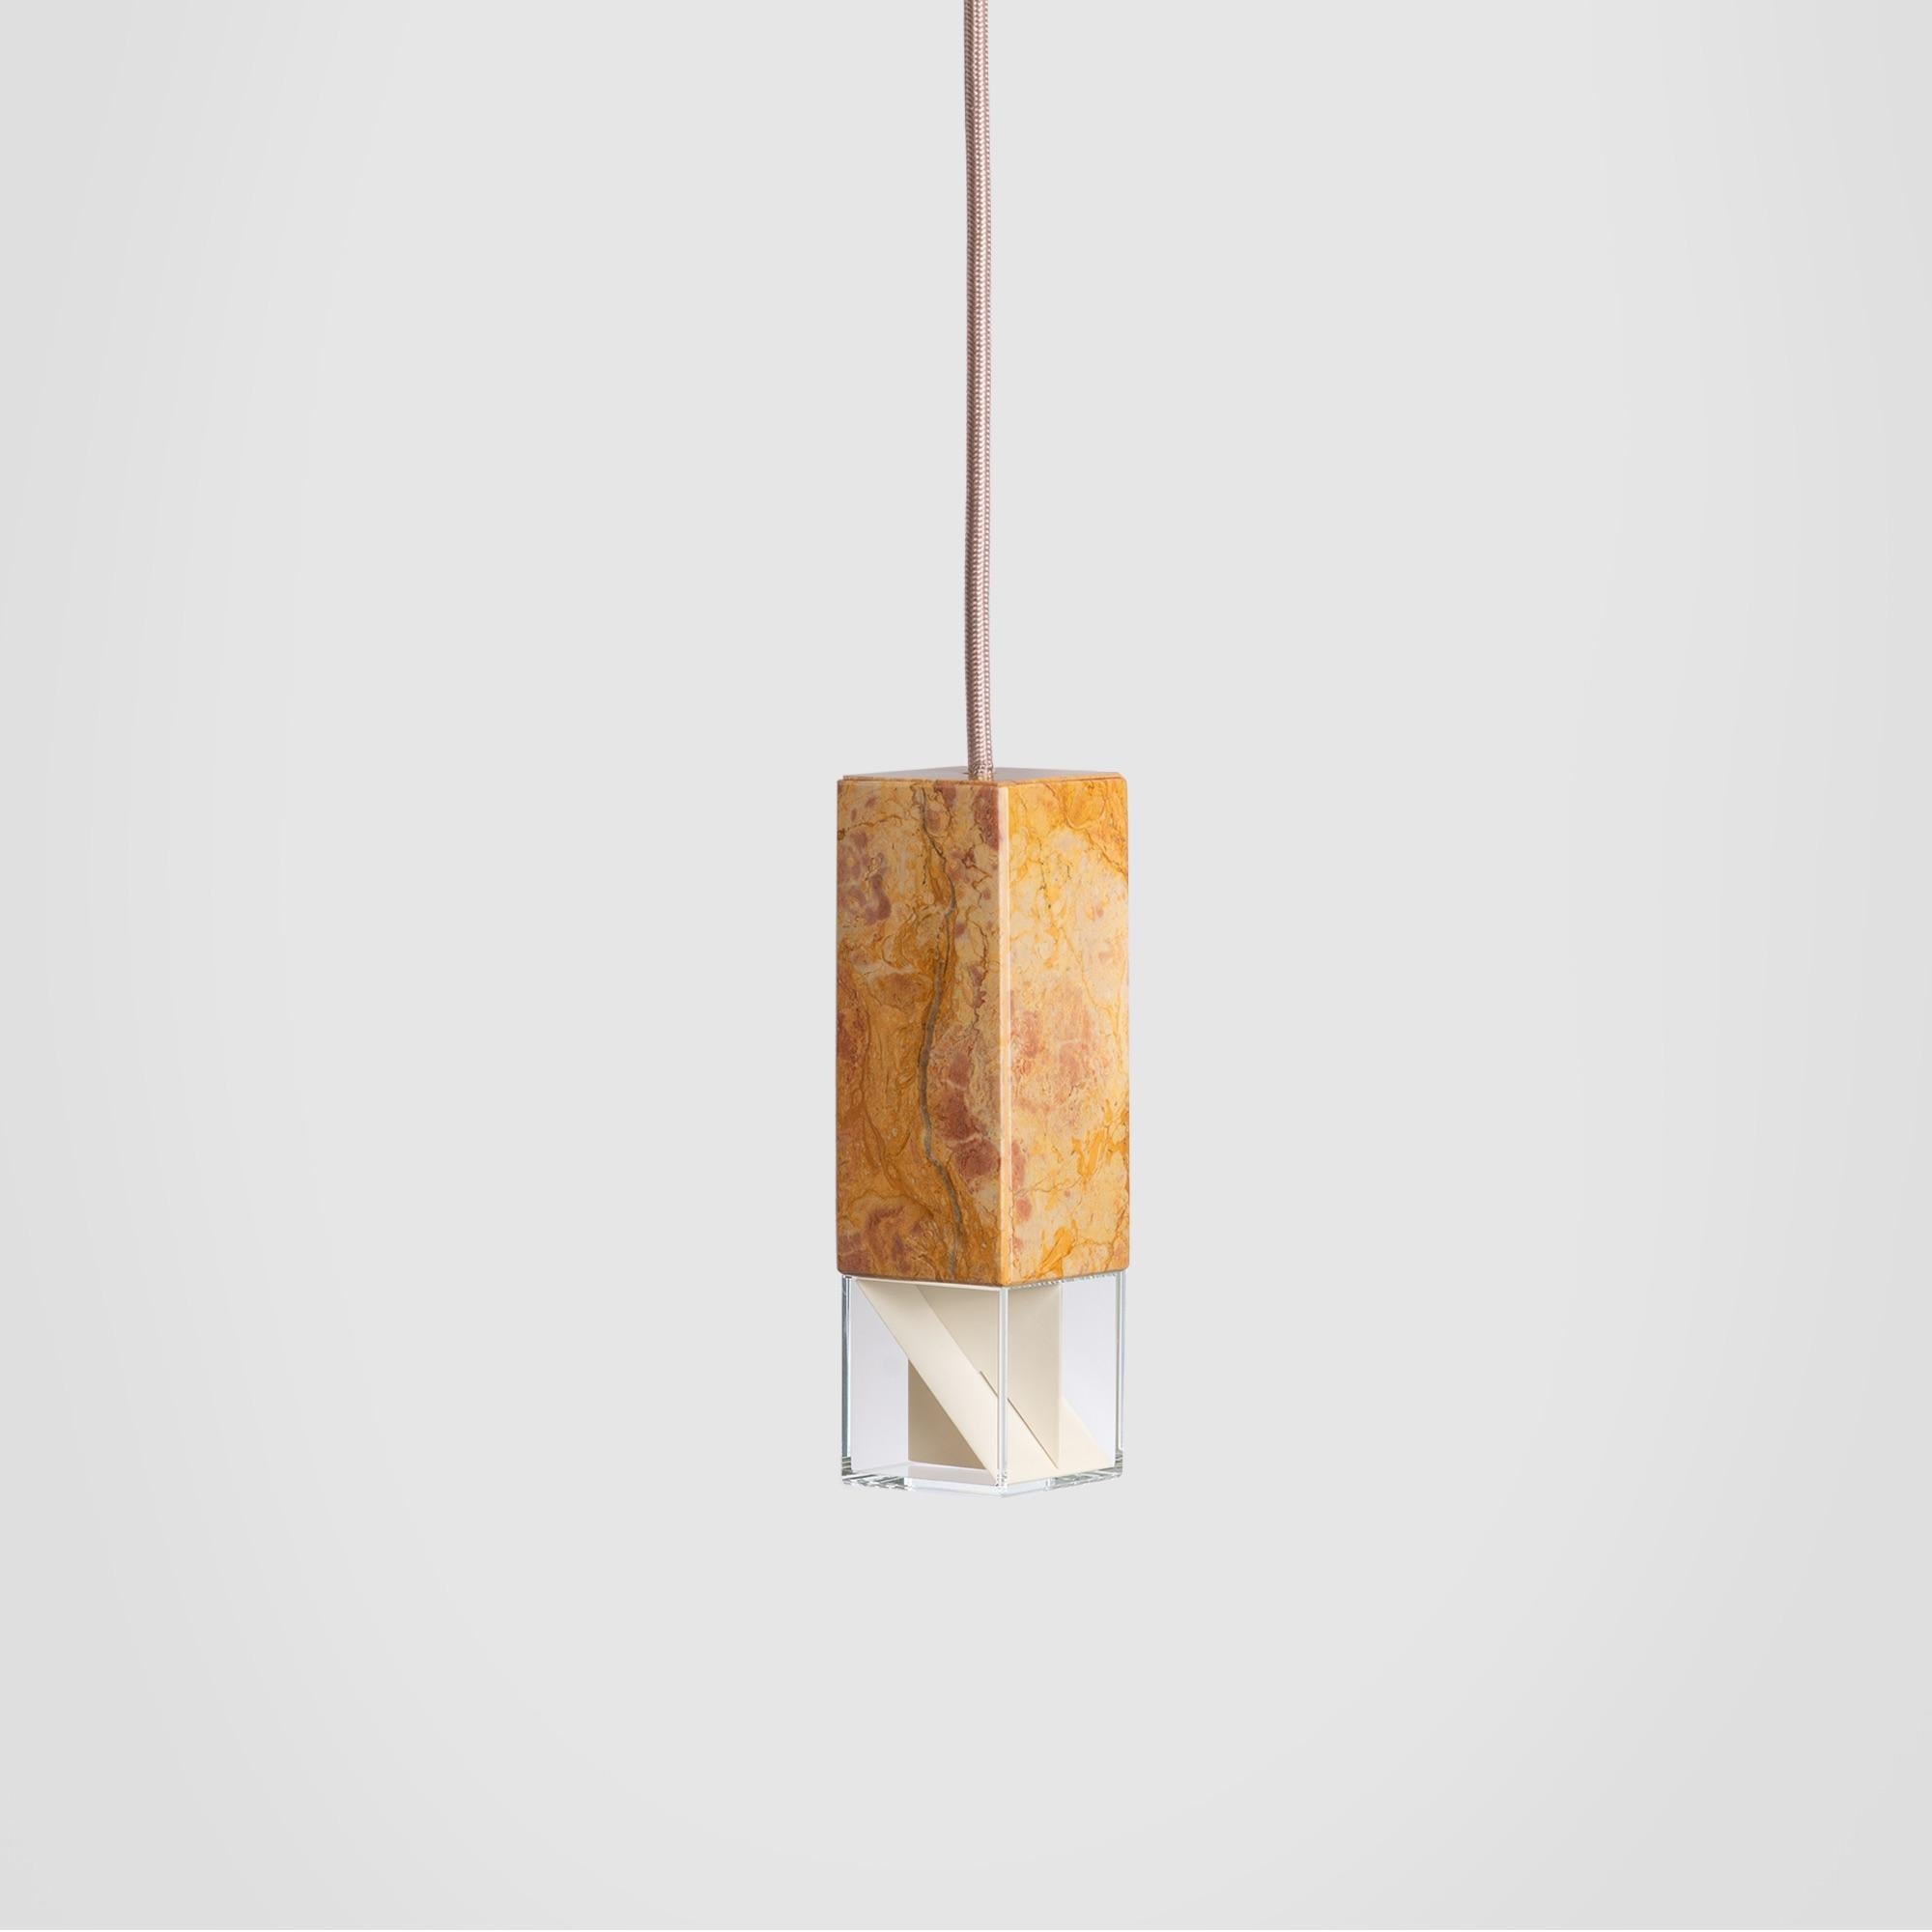 About
Contemporary Pendant Light Handcrafted in Yellow Marble by Formaminima

Lamp/One Yellow from Colour Edition
Design by Formaminima
Single Pendant
Materials:
Body lamp handcrafted in translucent marble Royal Pink Yellow / crystal glass diffuser